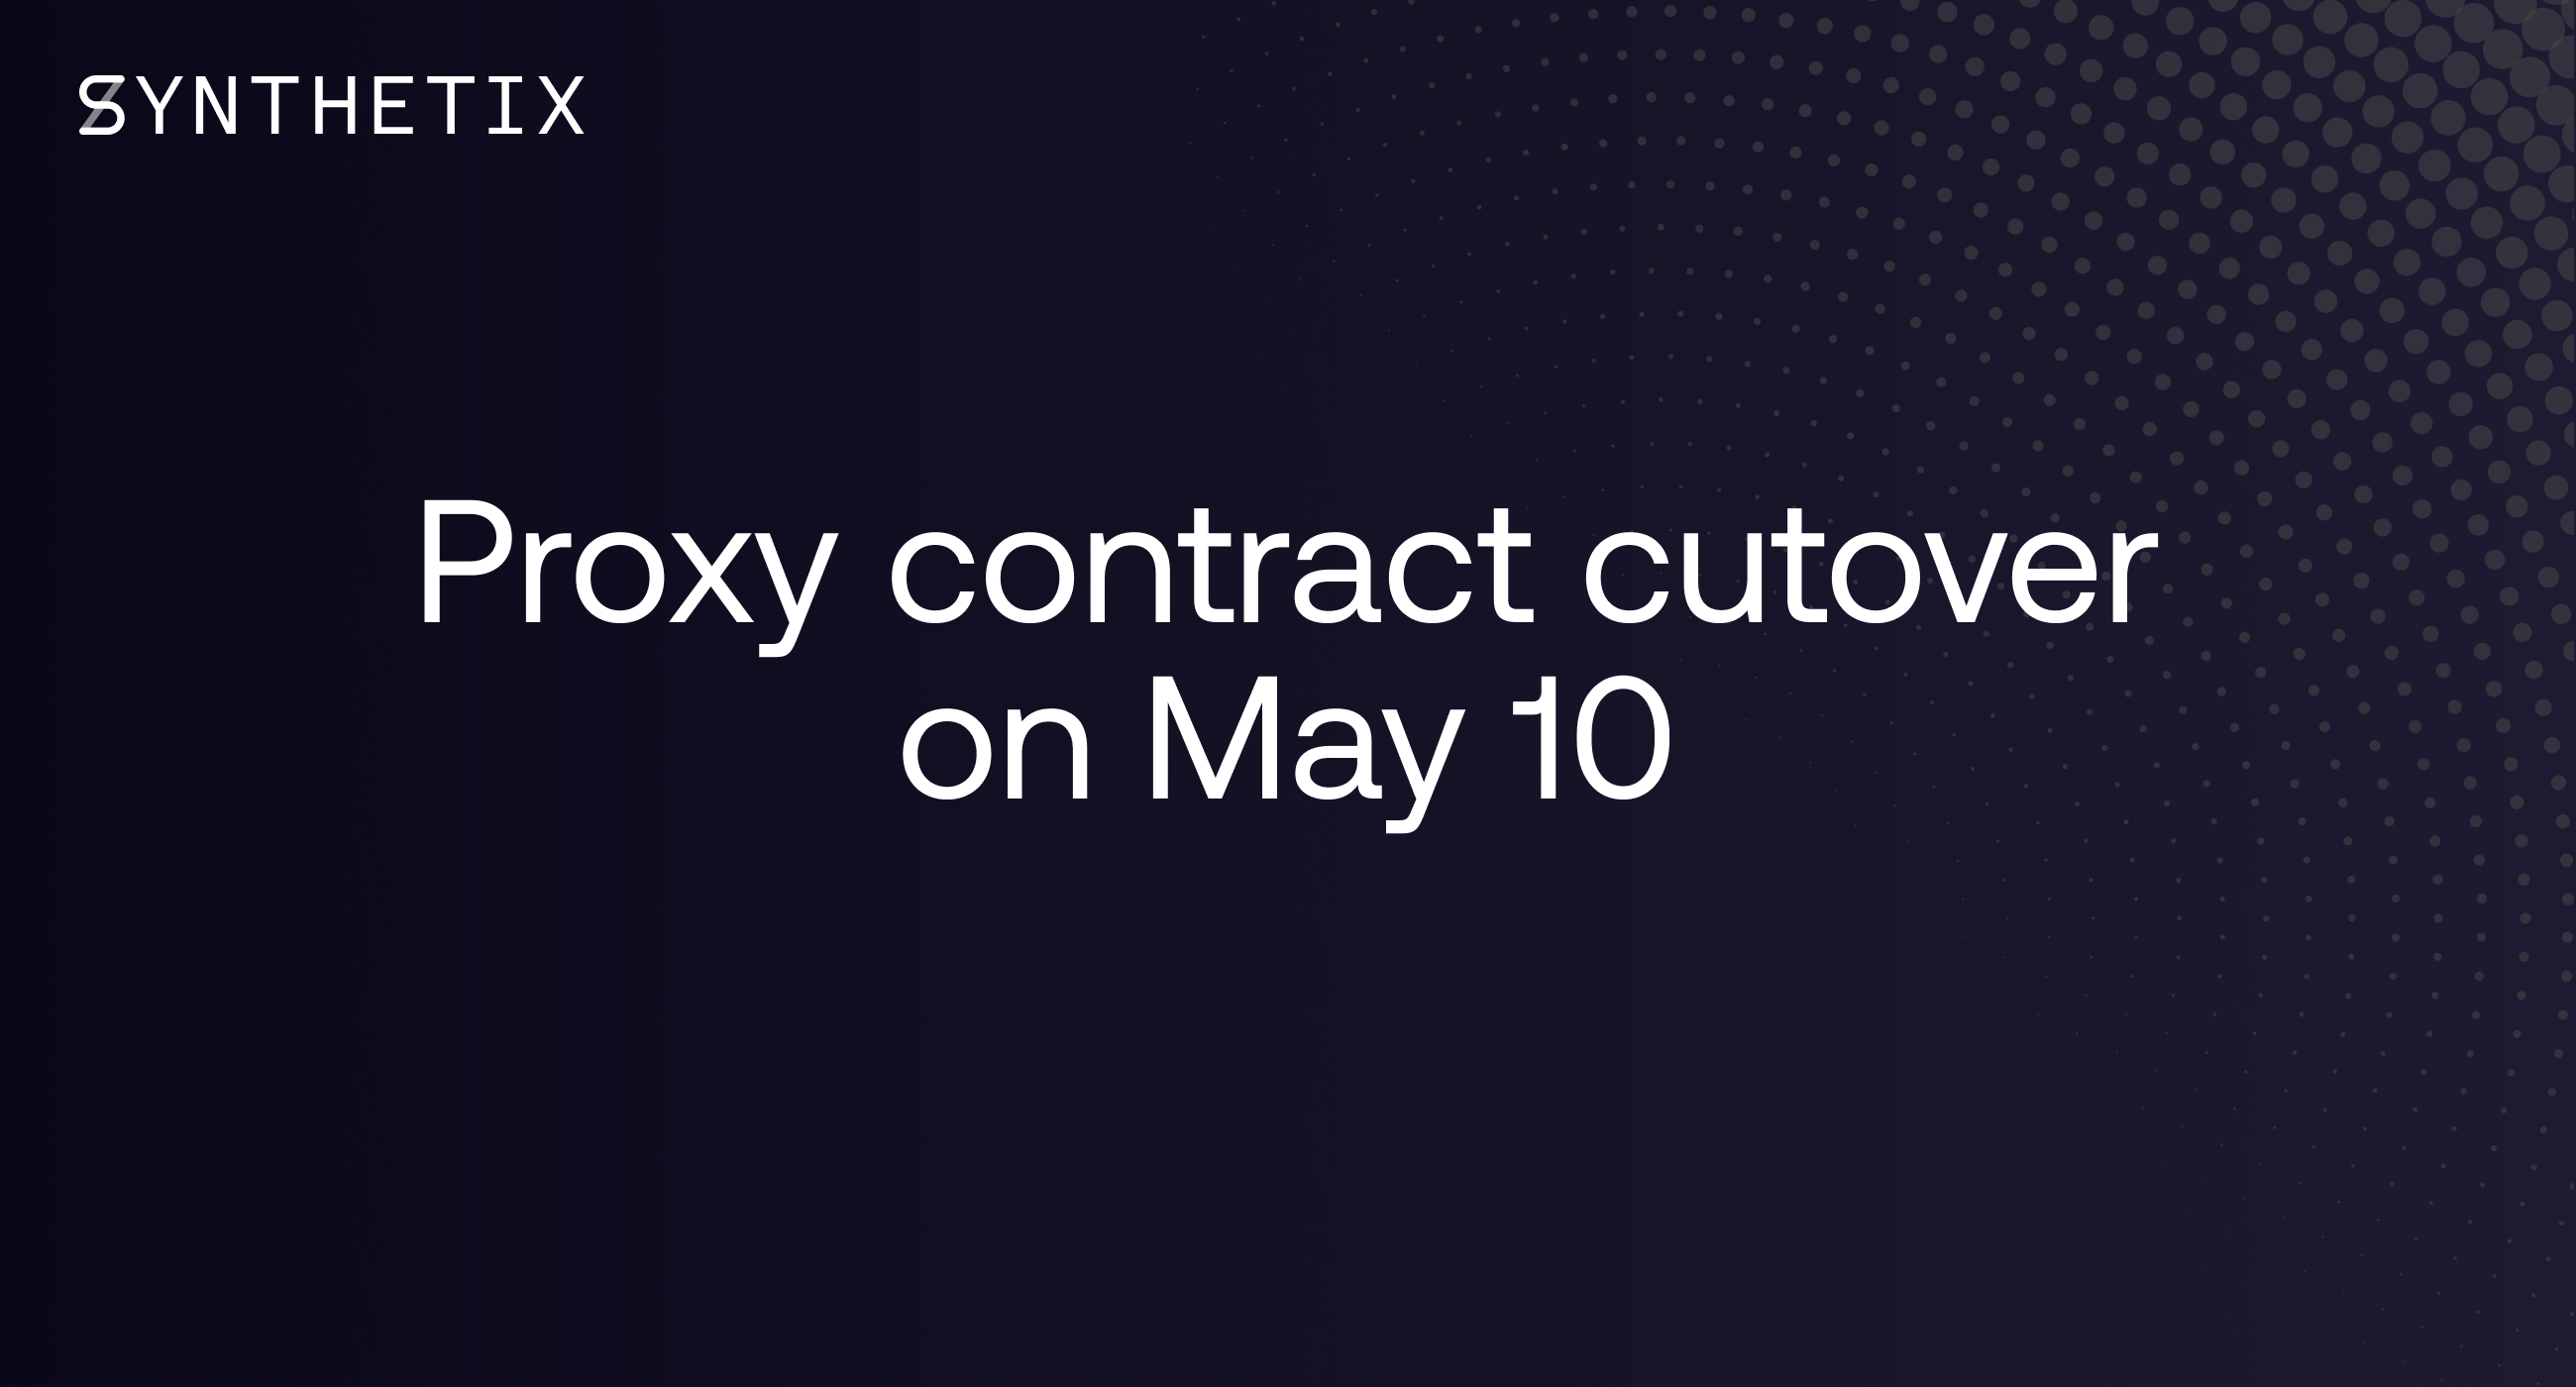 Proxy contract cutover on May 10